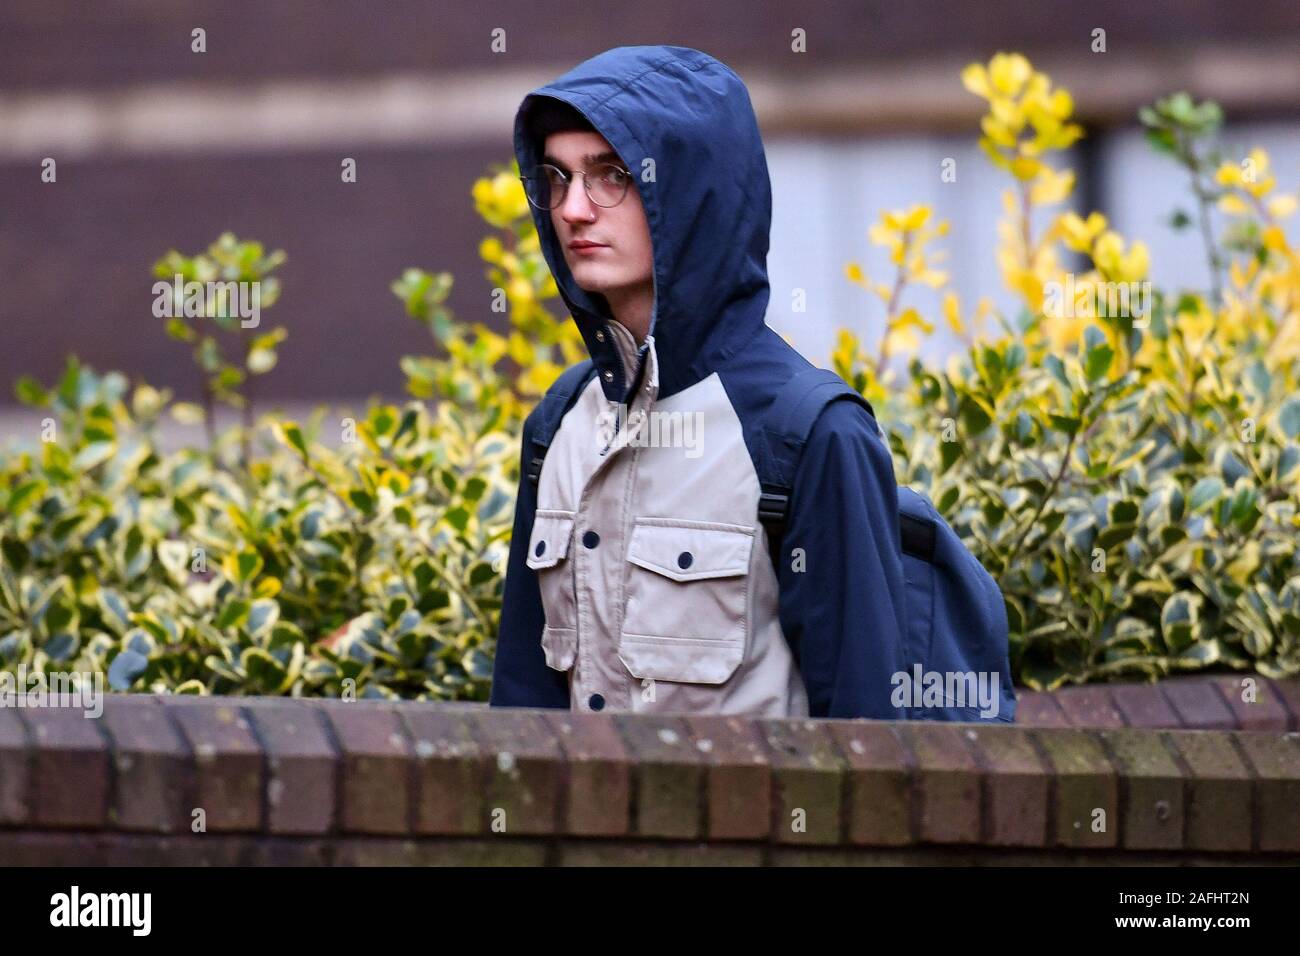 Connor Scothern, 18, who denies membership of National Action, a banned neo-Nazi terrorist group, arriving at Birmingham Crown Court. Stock Photo